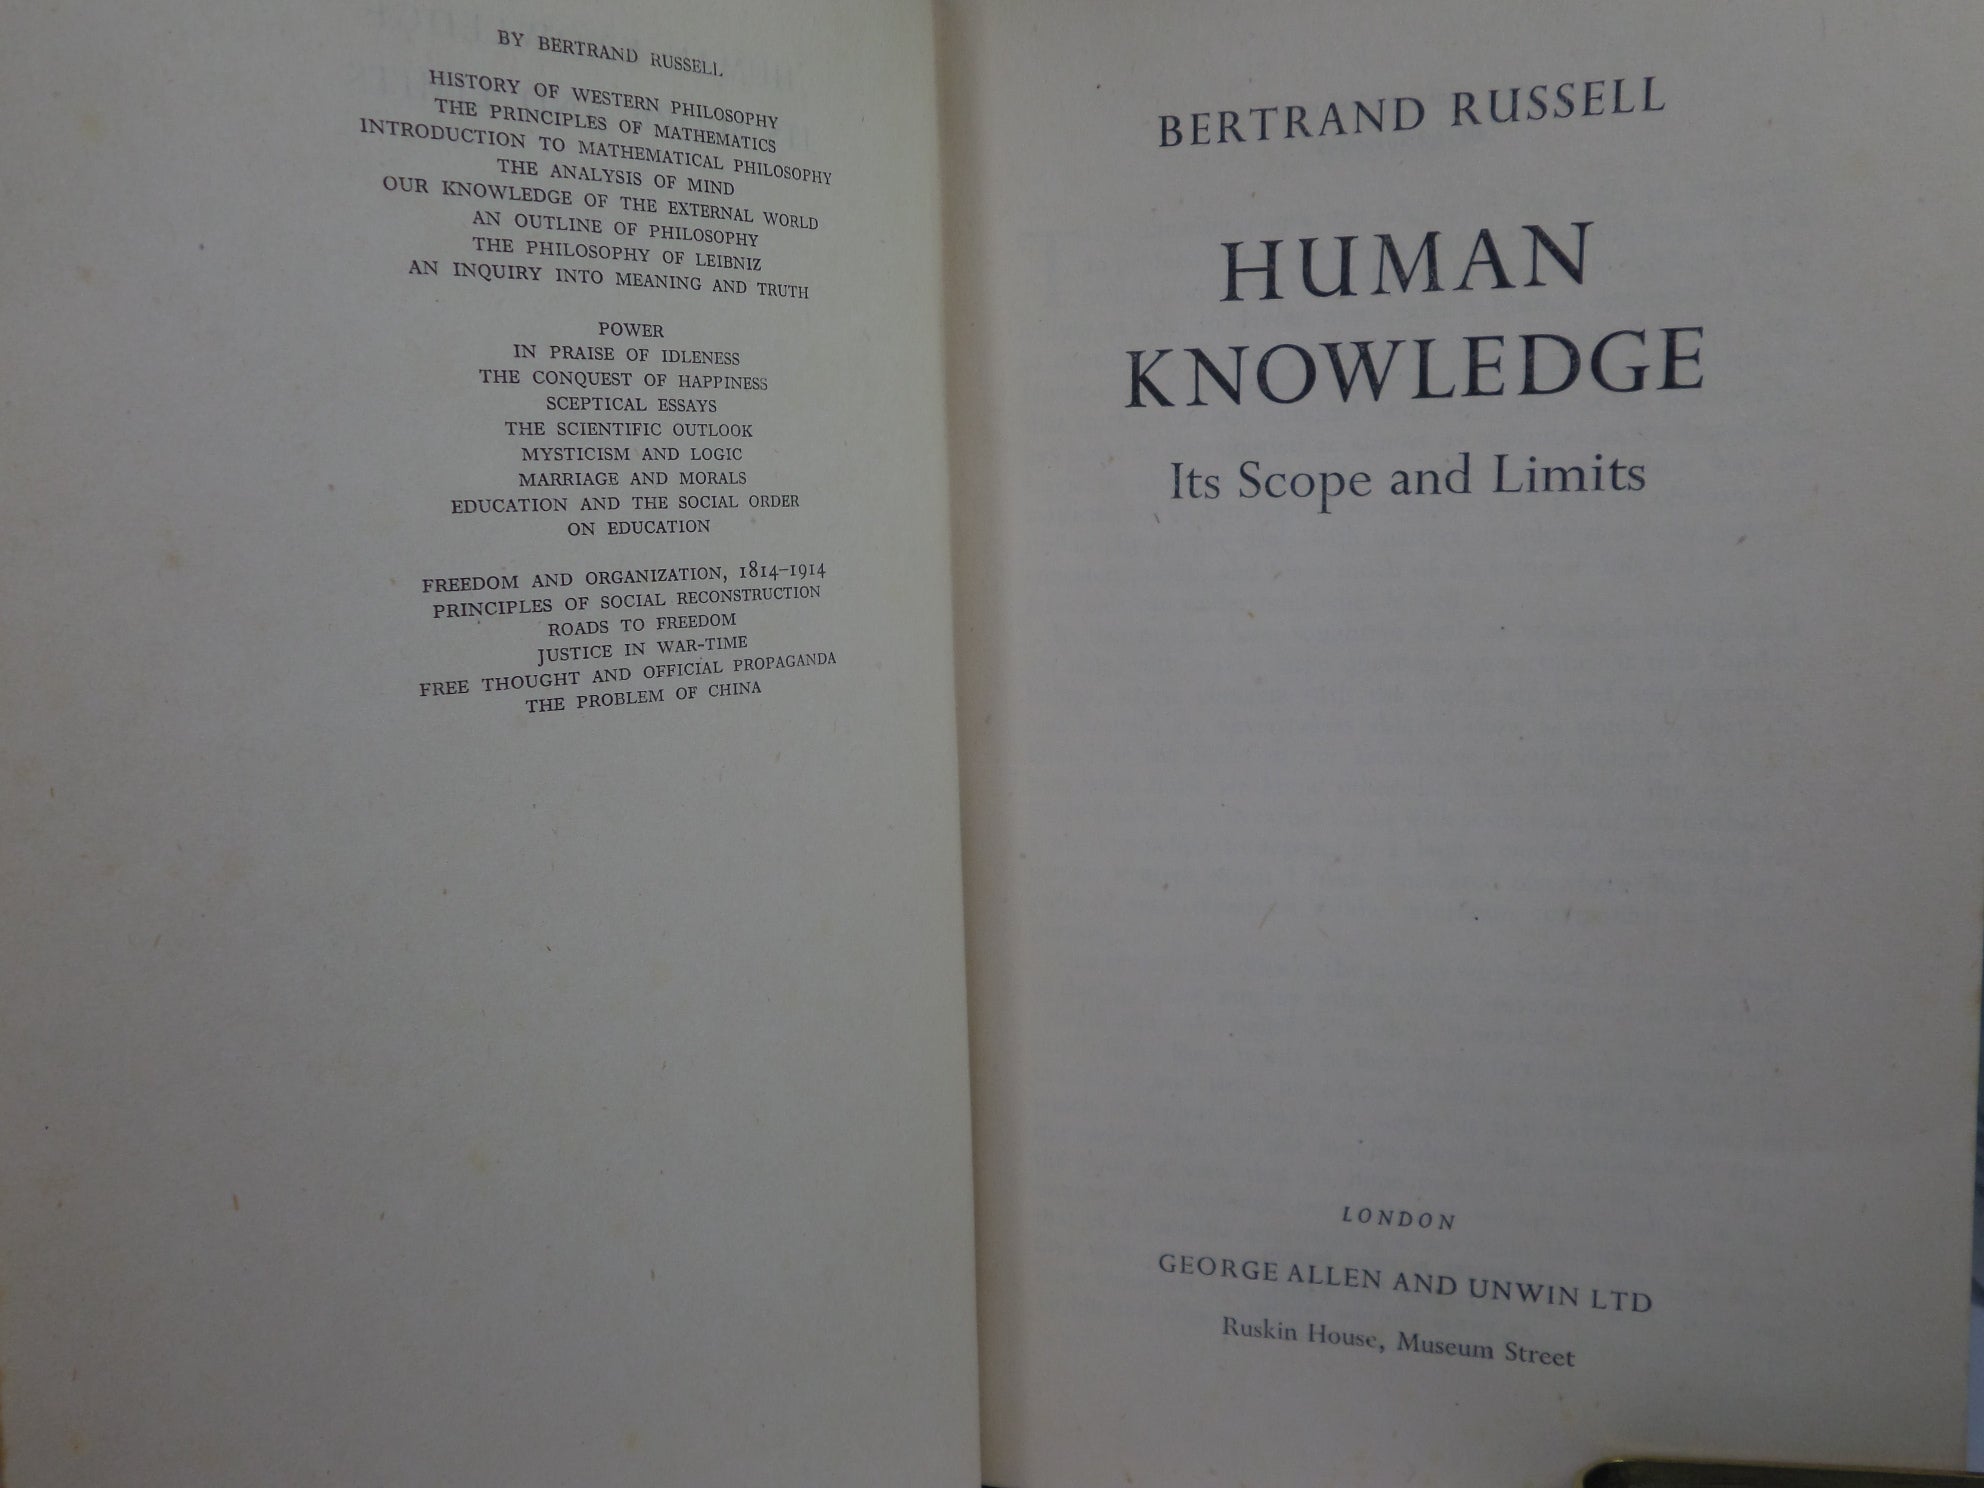 HUMAN KNOWLEDGE BY BERTRAND RUSSELL 1948 FIRST EDITION